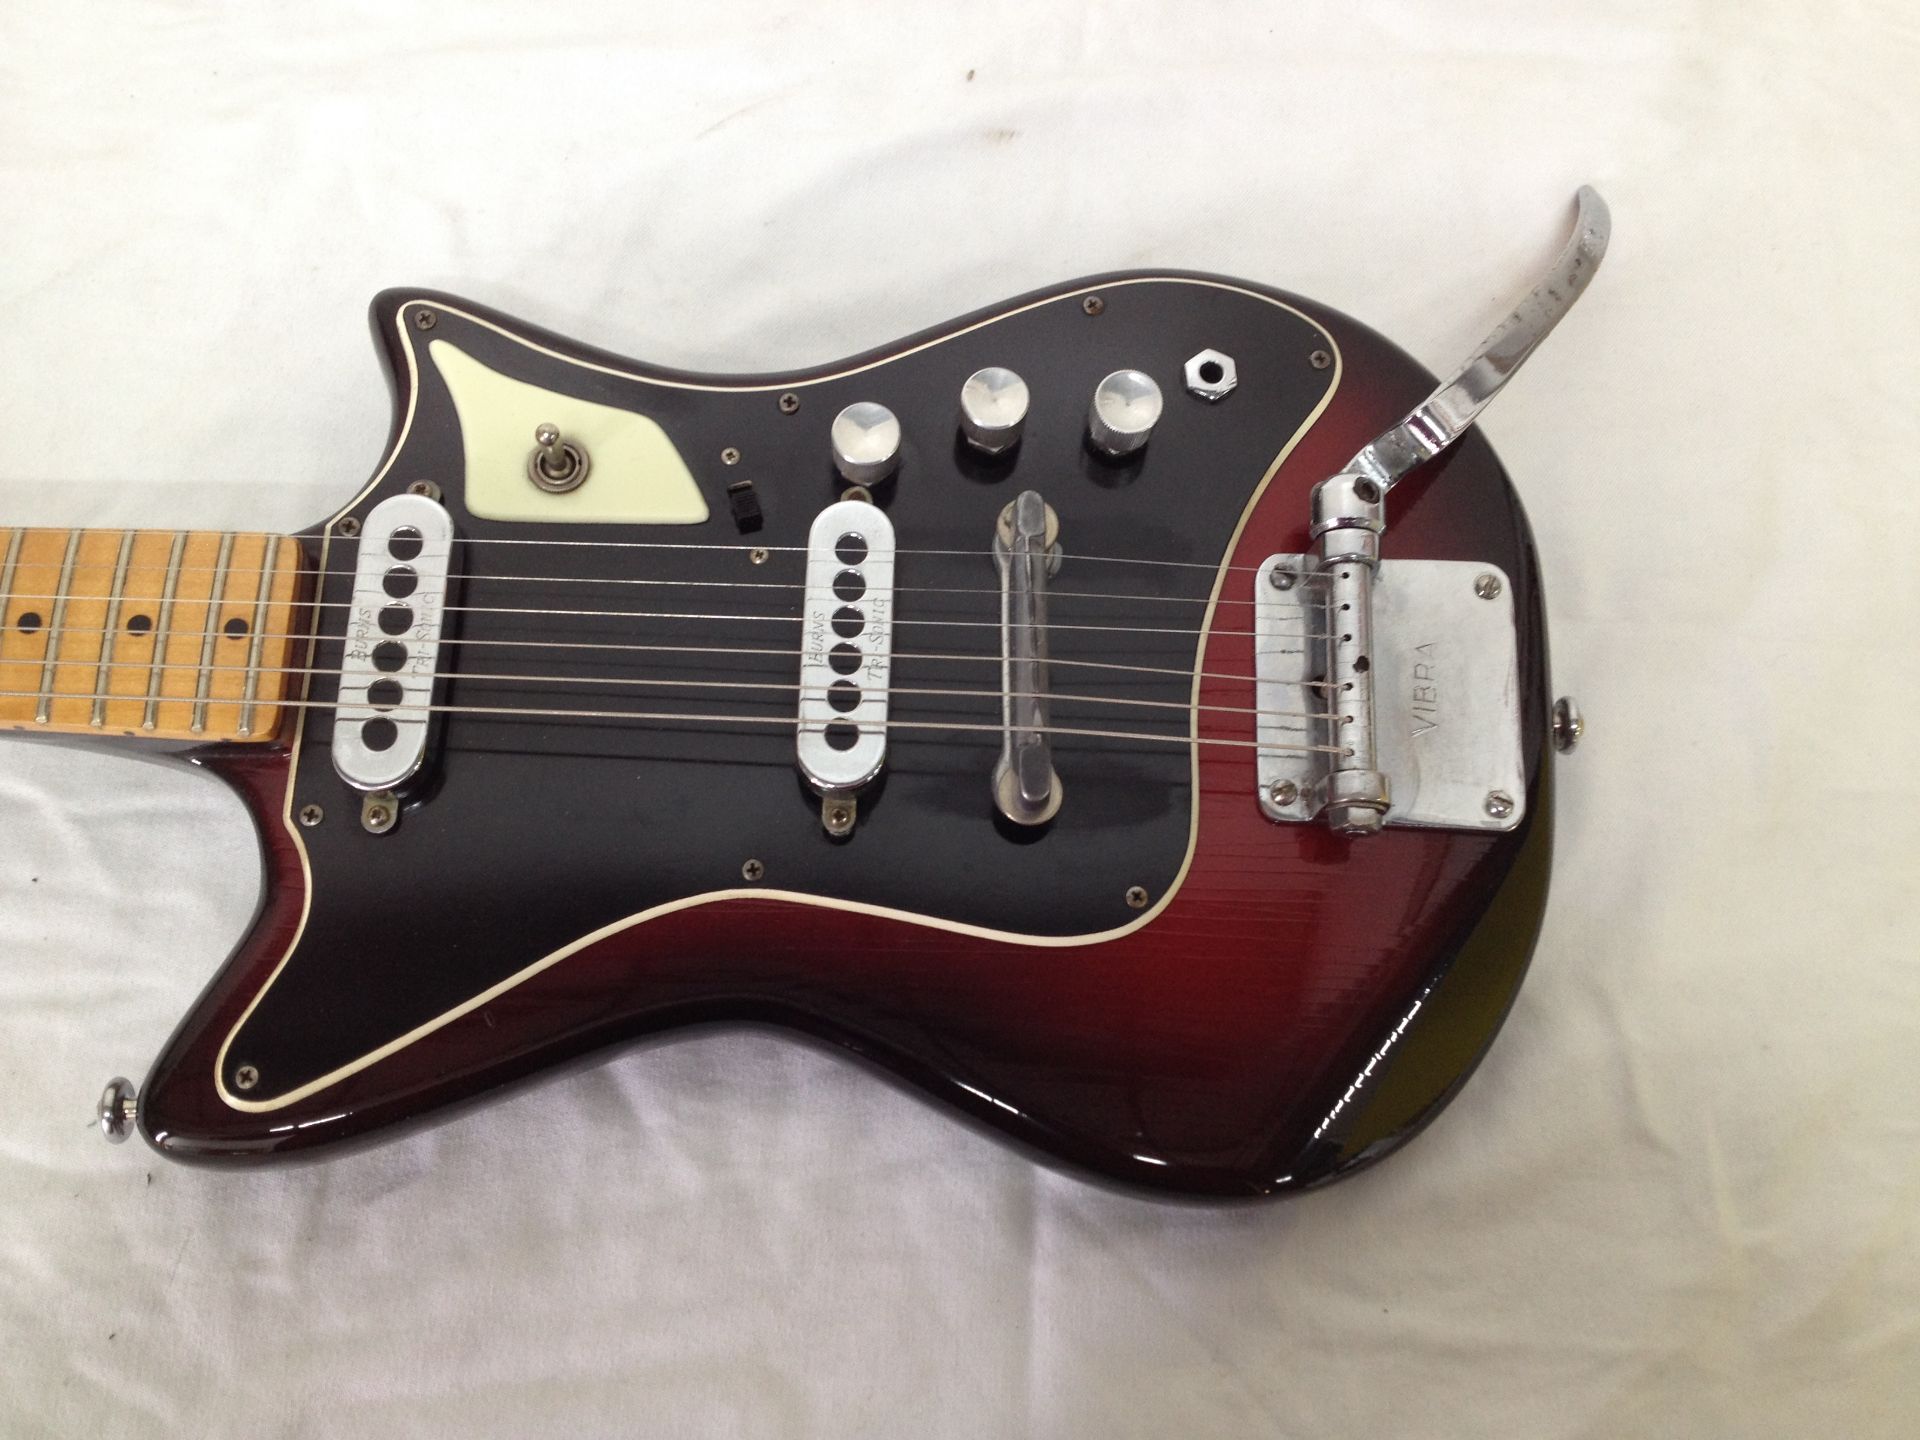 Burns Tri-Sonic Electric Guitar in Brown, Black and Piano White; with Hard Case - Image 6 of 7